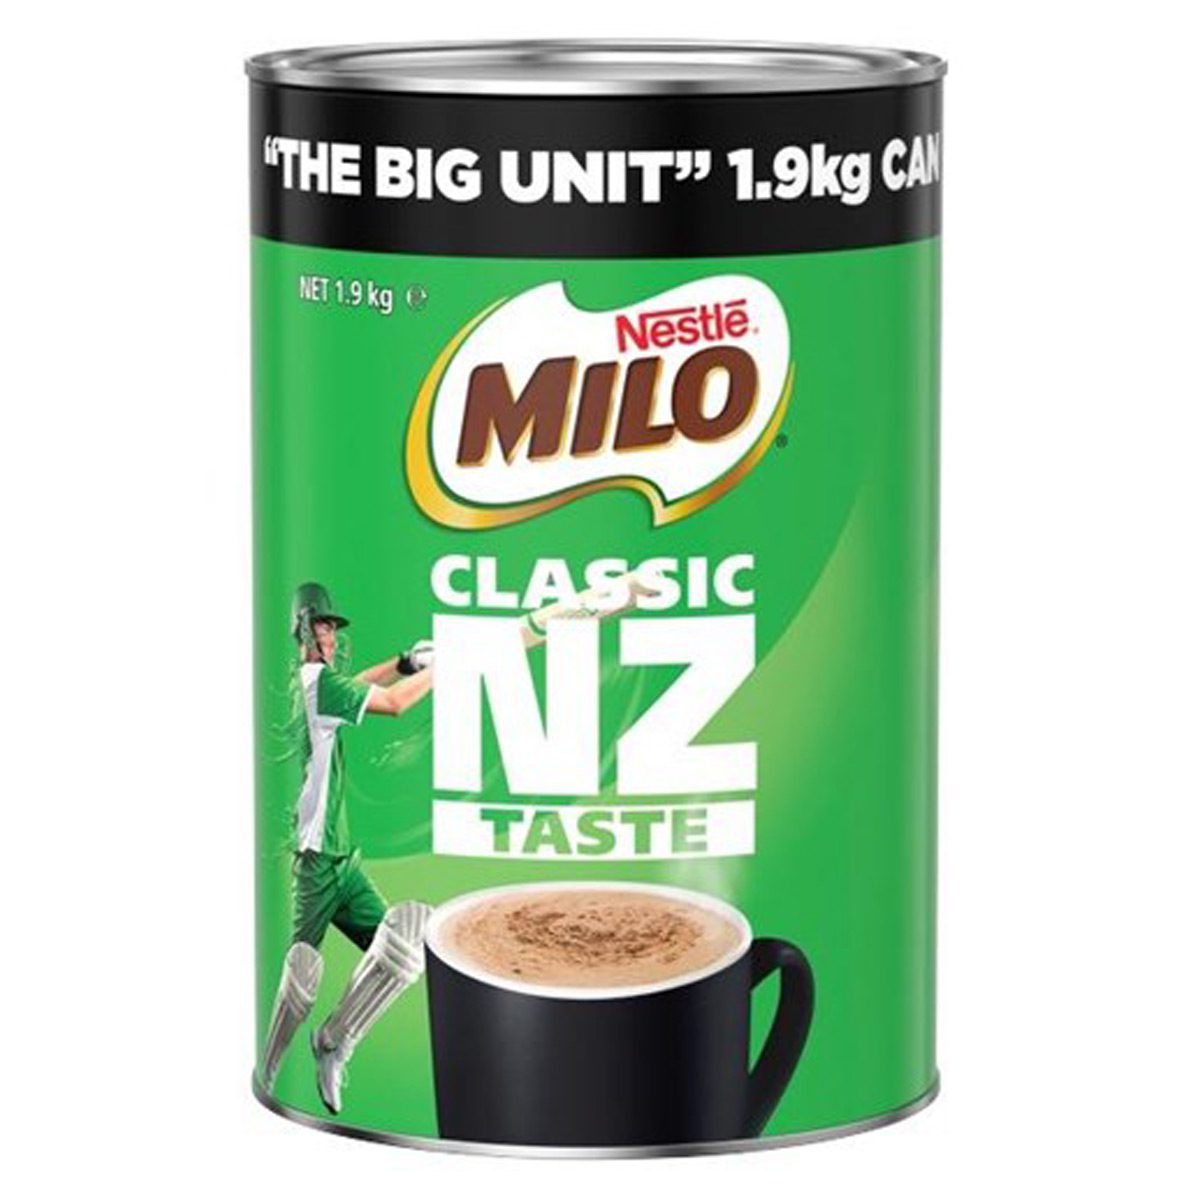 consumables-hospitality-beverage-food-nestle-milo-tin -1.9kg-classic-new-zealand-taste-milo-drink-kiwis-have-known-loved-more-than-80-years-malty-milky-flavour-rich-chocolatey-taste-vjs-distributors-MILO